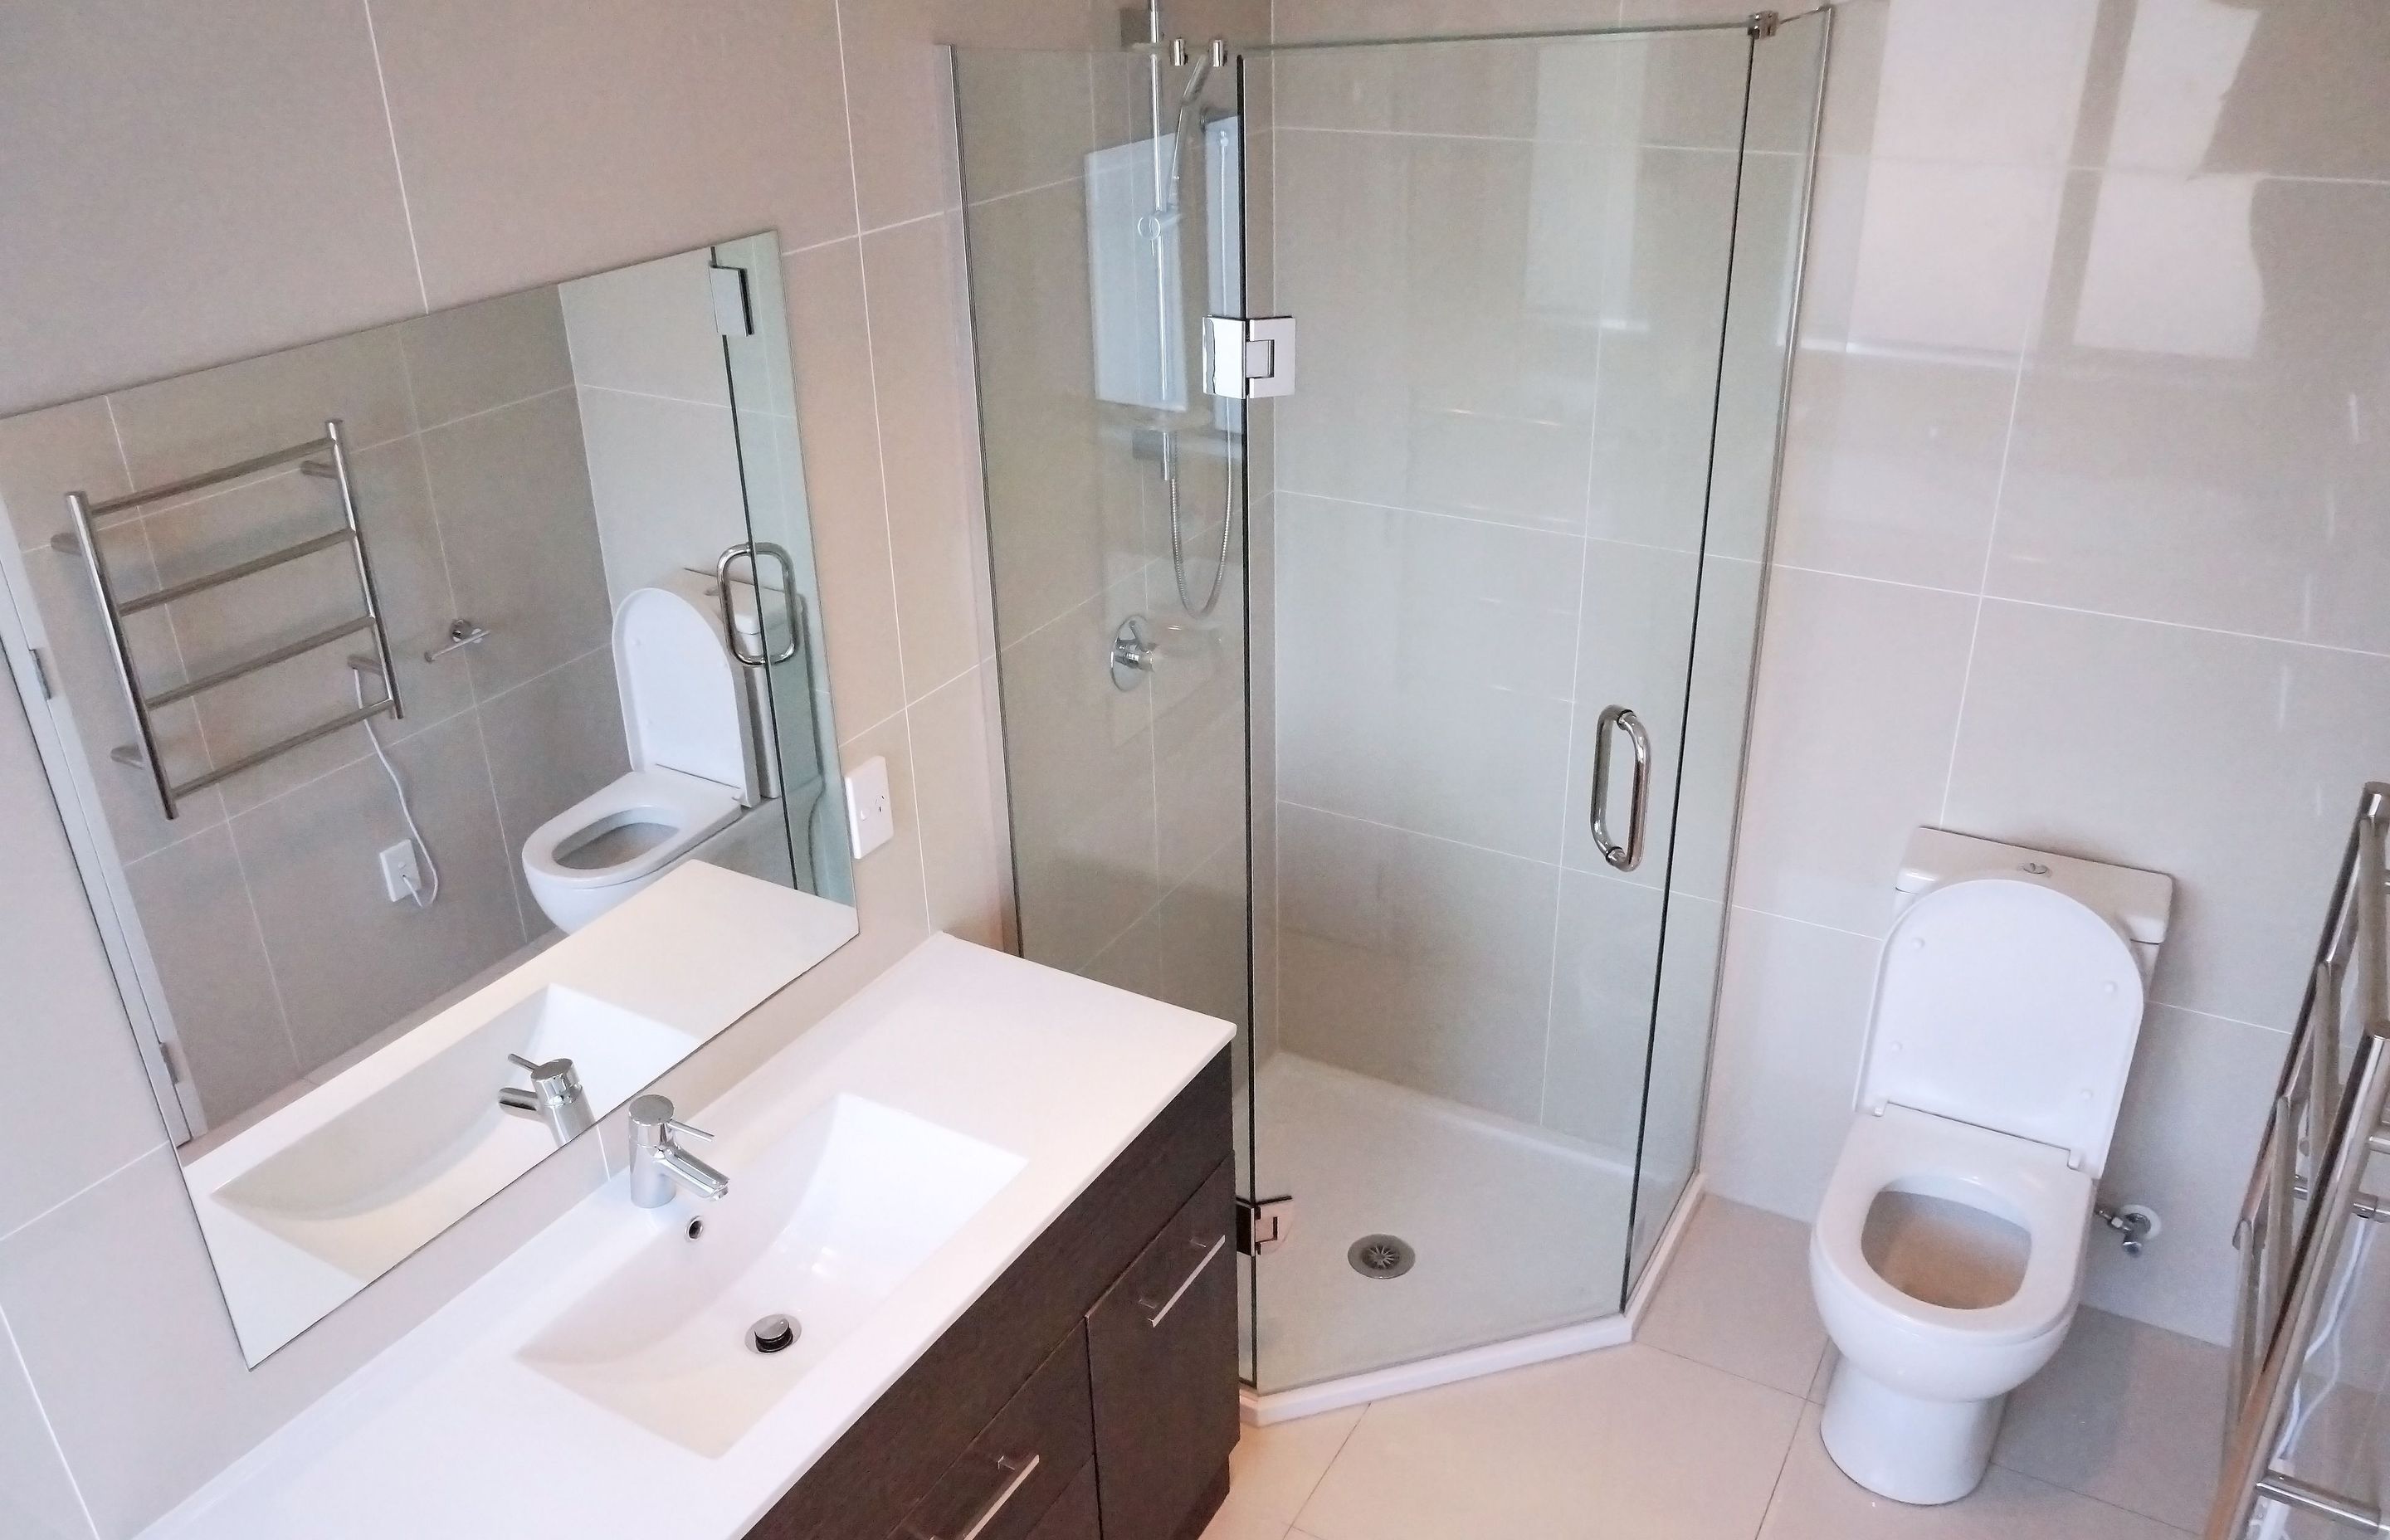 Bathroom Renovation in North Shore, Auckland - by Superior Renovations.